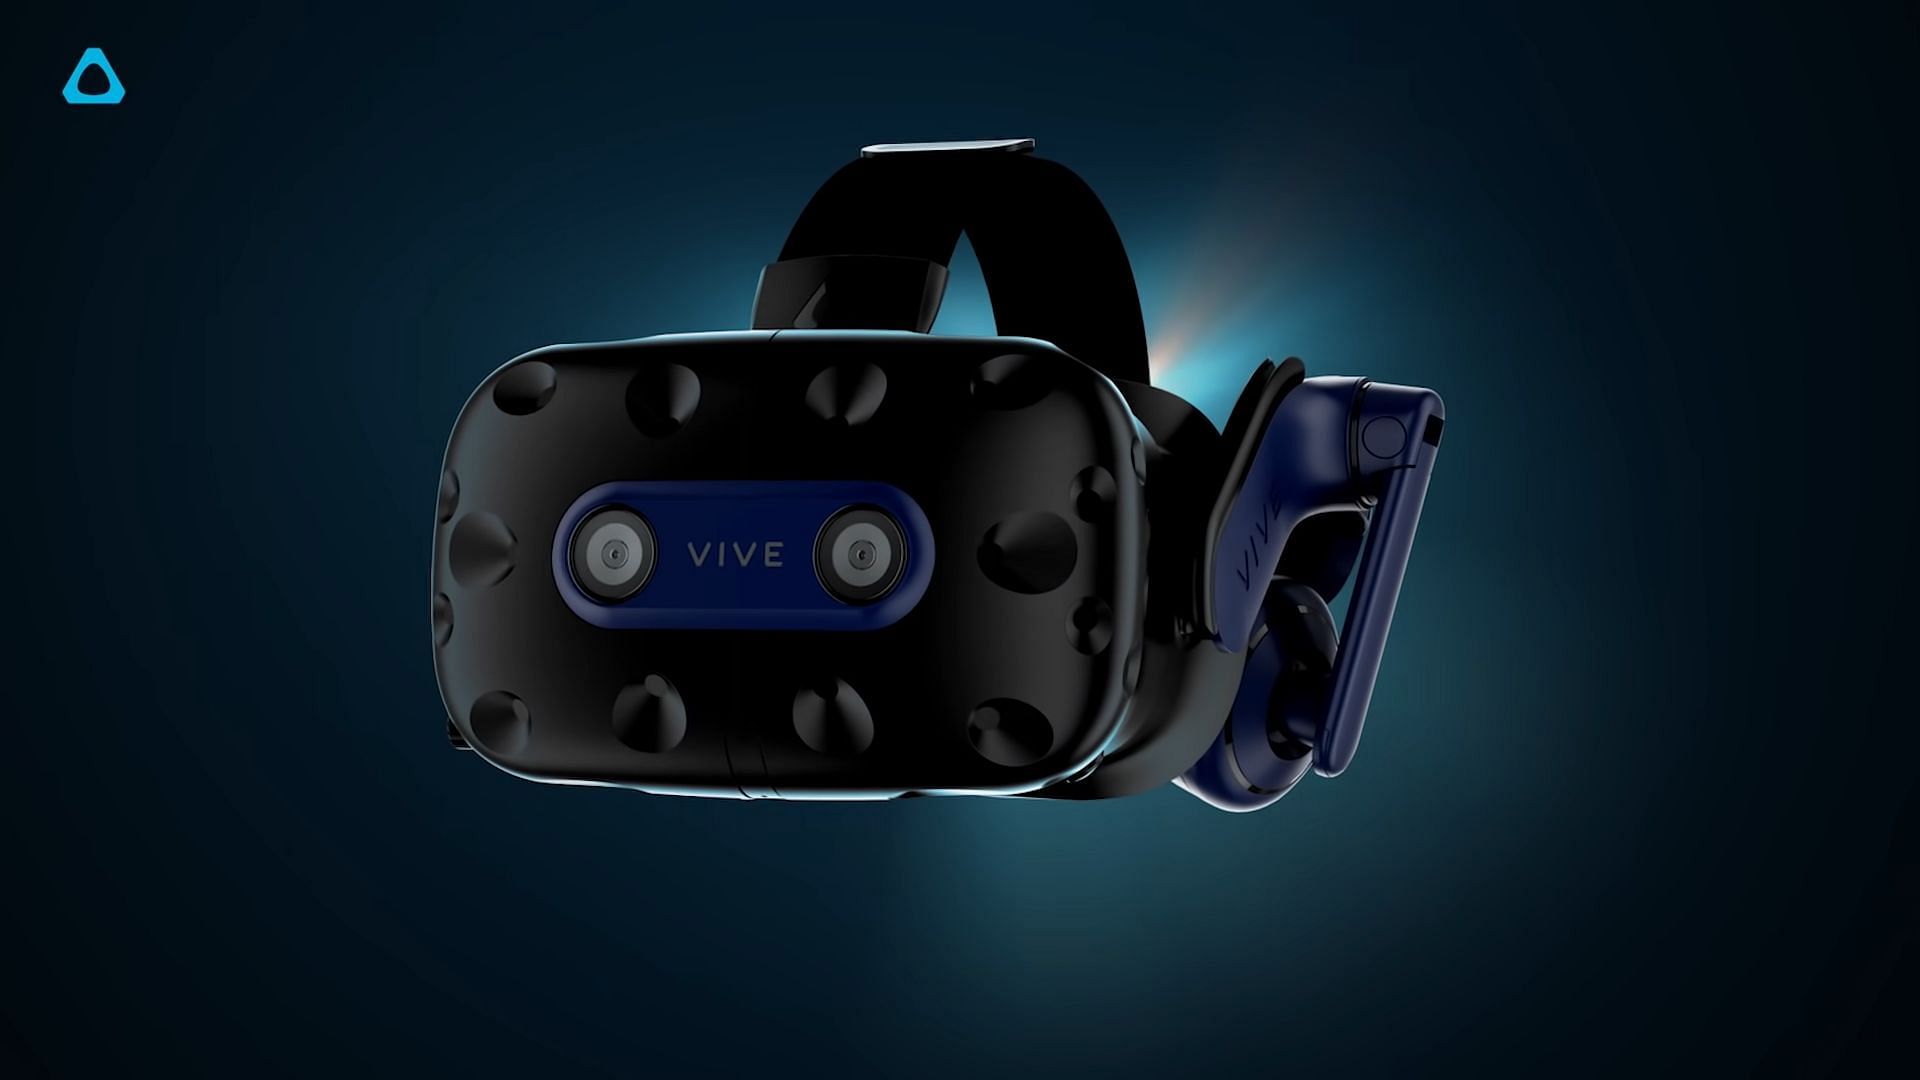 The HTC Vive Pro 2 has the highest resolution among VR headsets (Image via HTC)